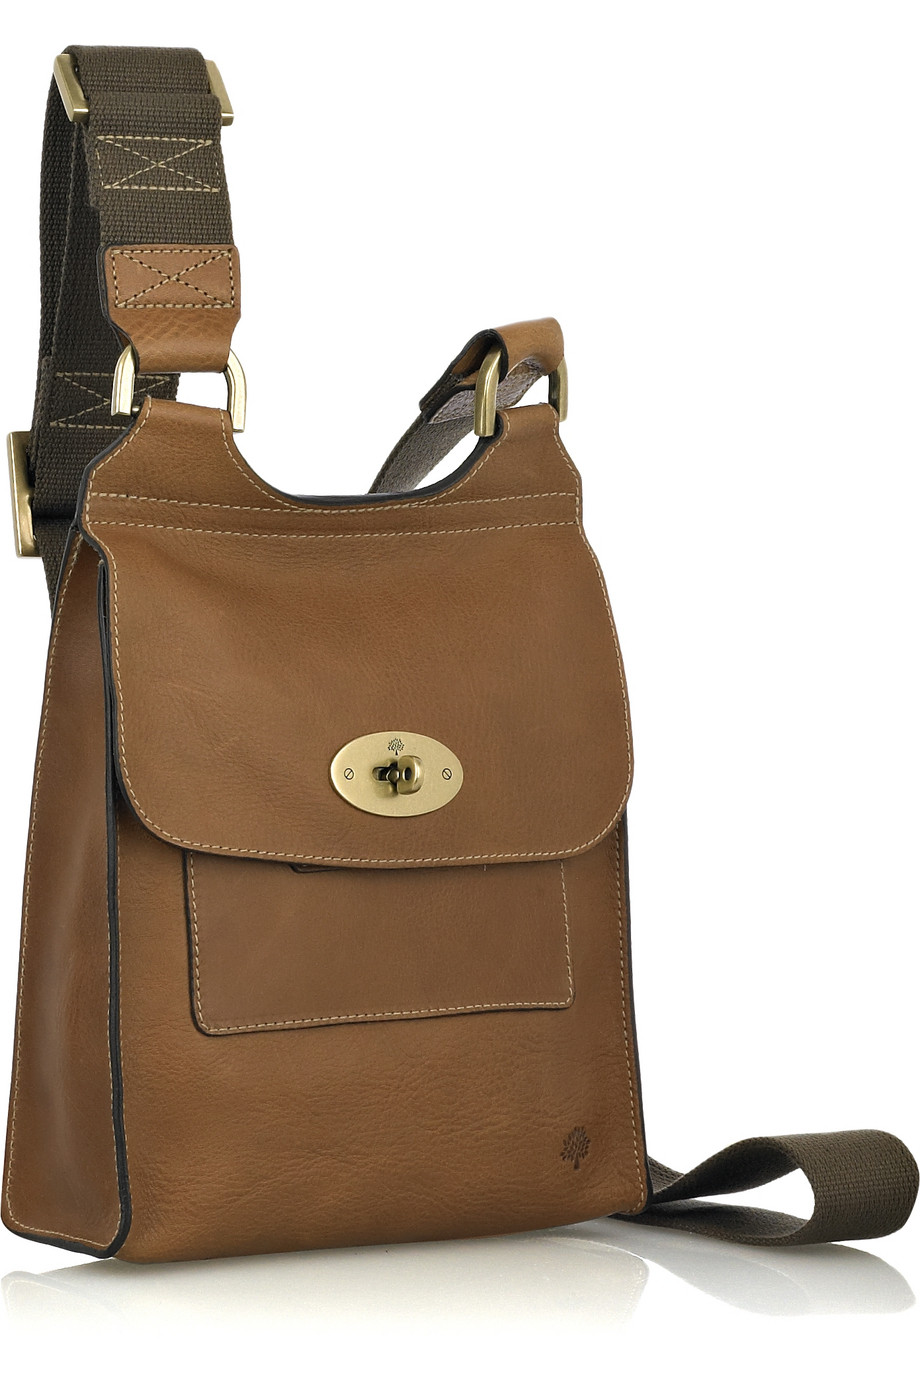 Mulberry Brown Leather Crossbody Bag